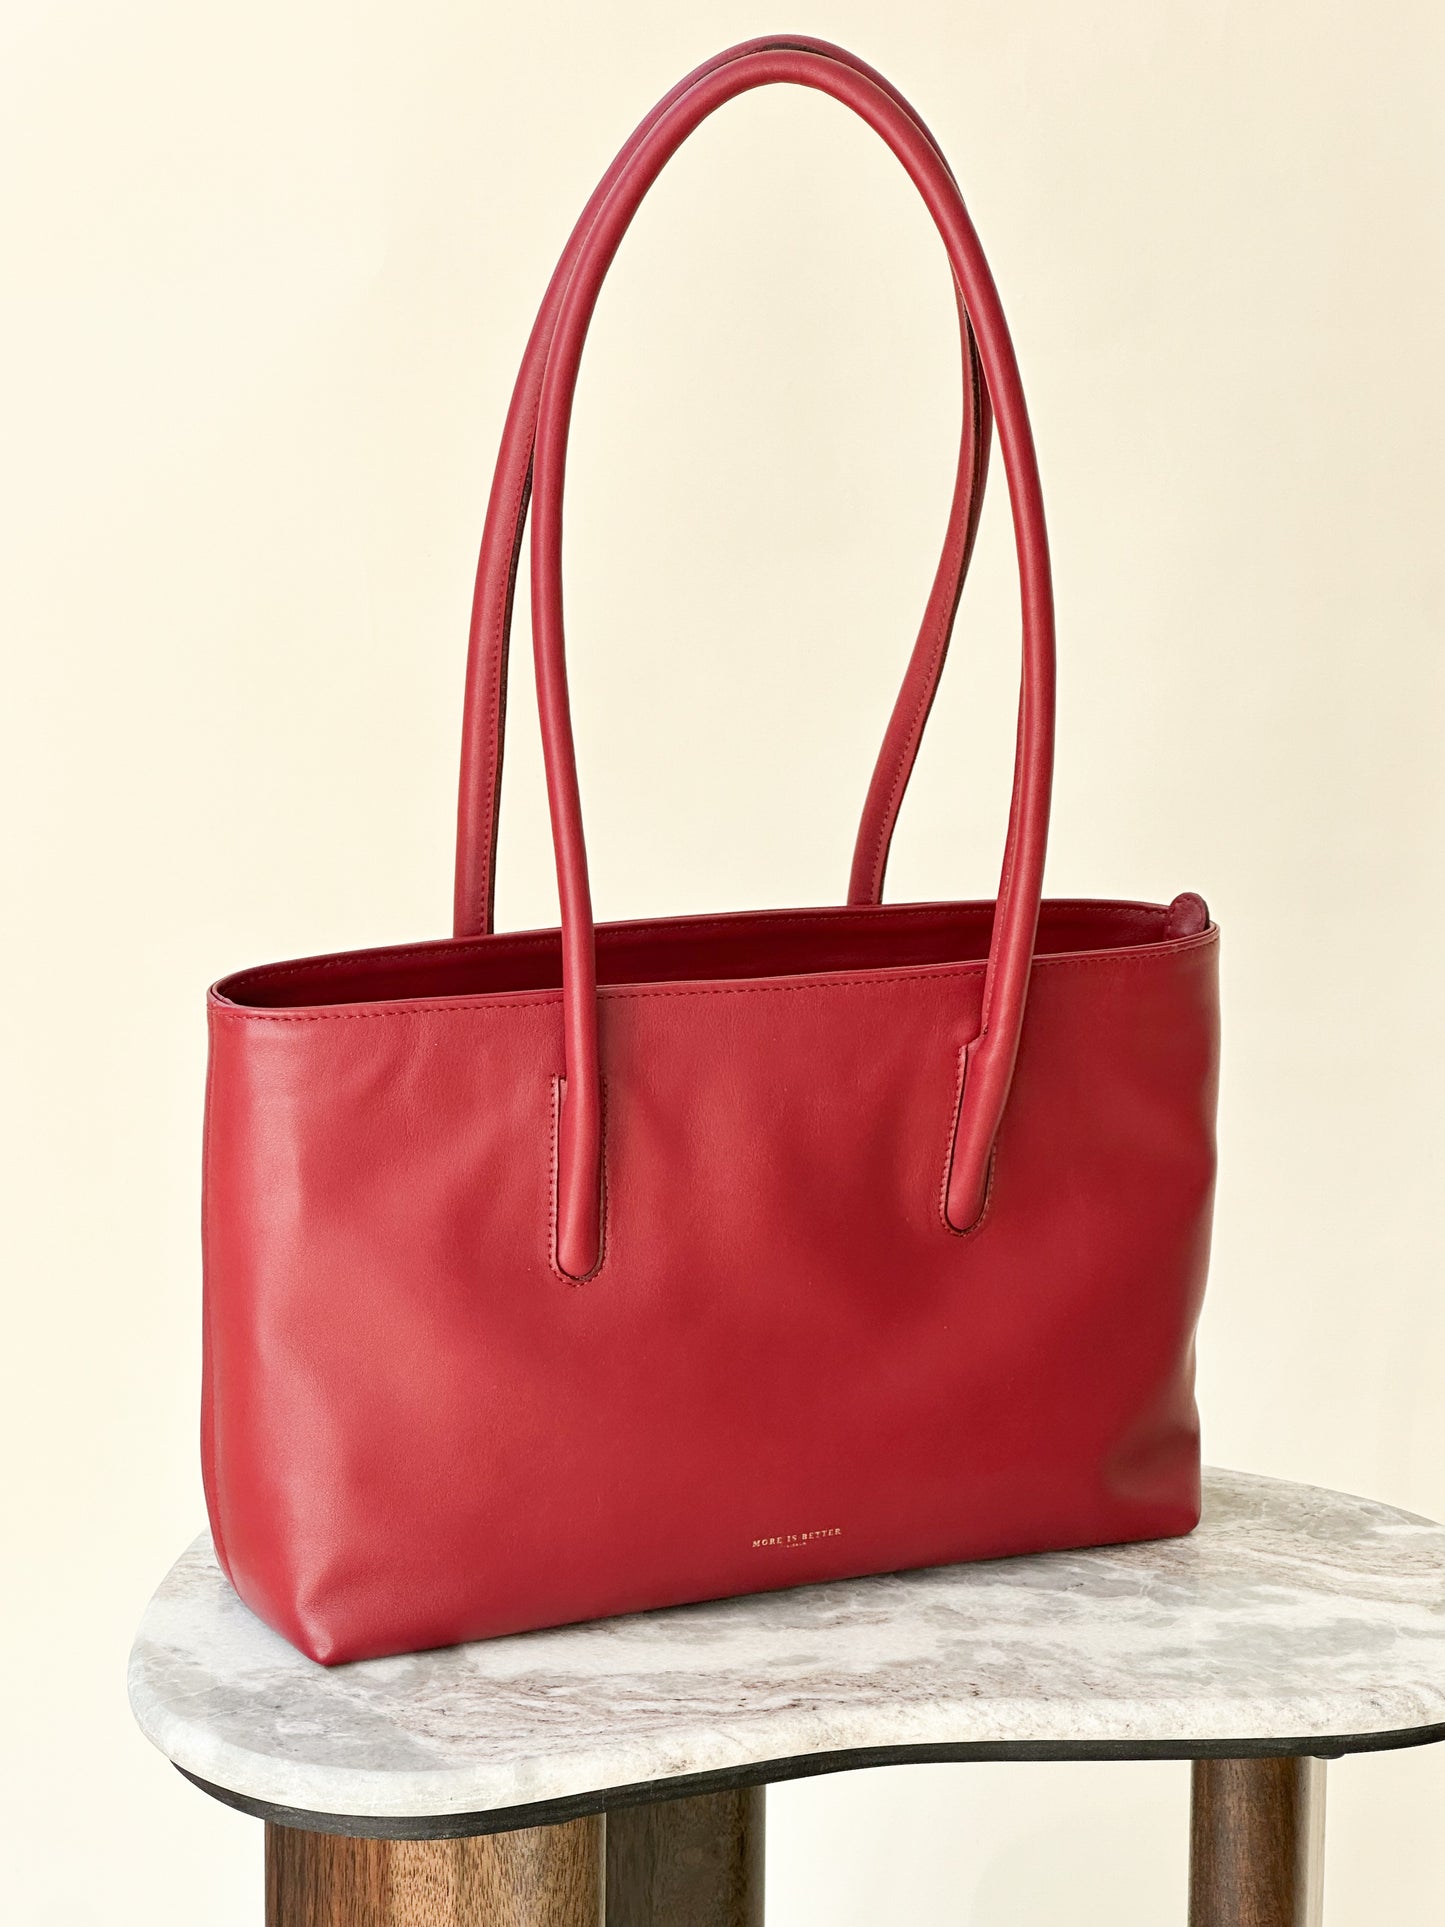 Rio Tote In Deep Red